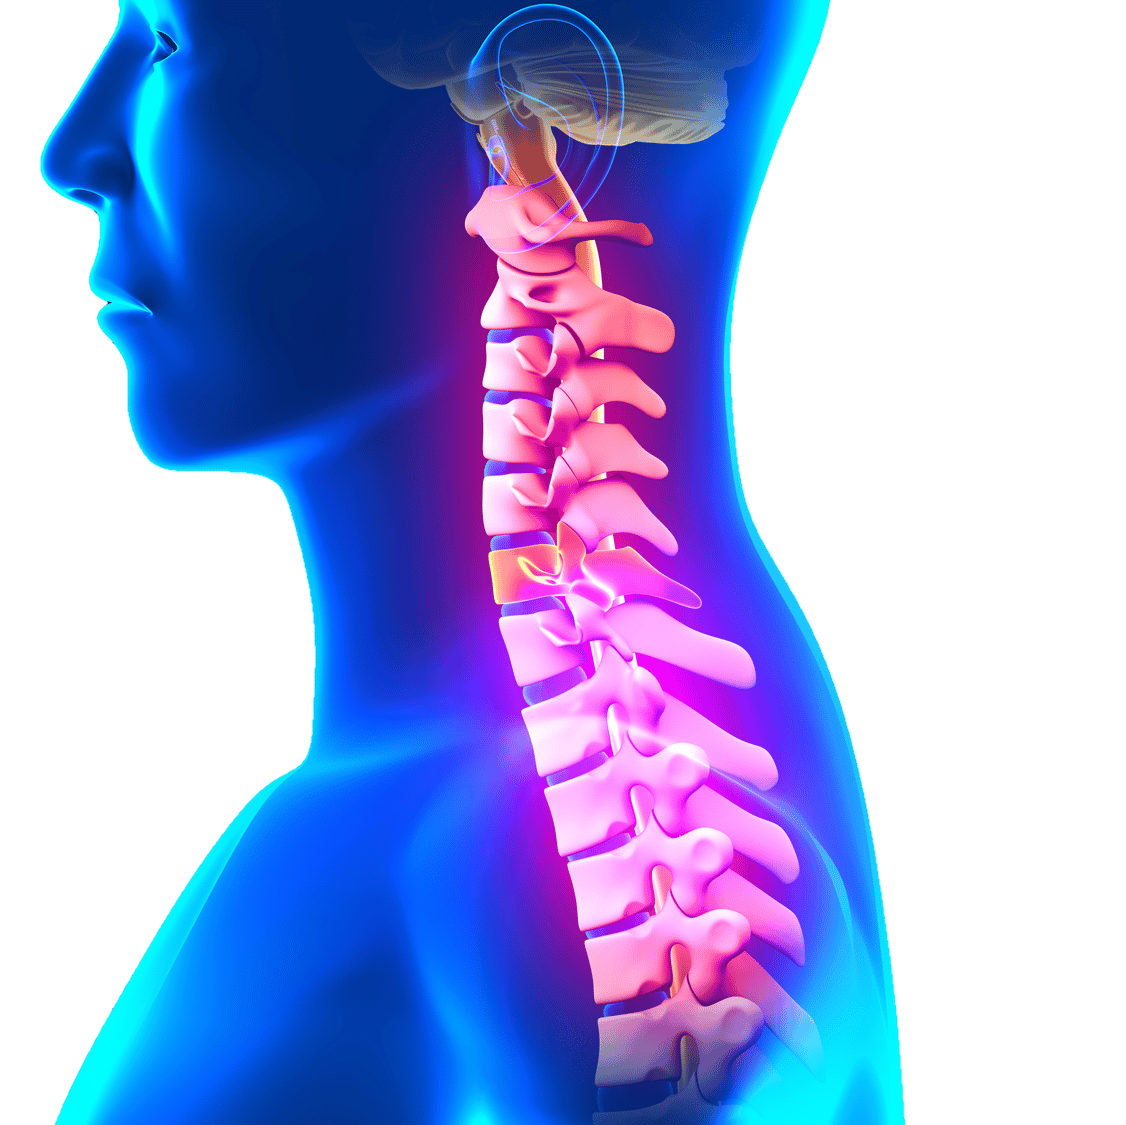 Neck pain â Spineology Chiropractic